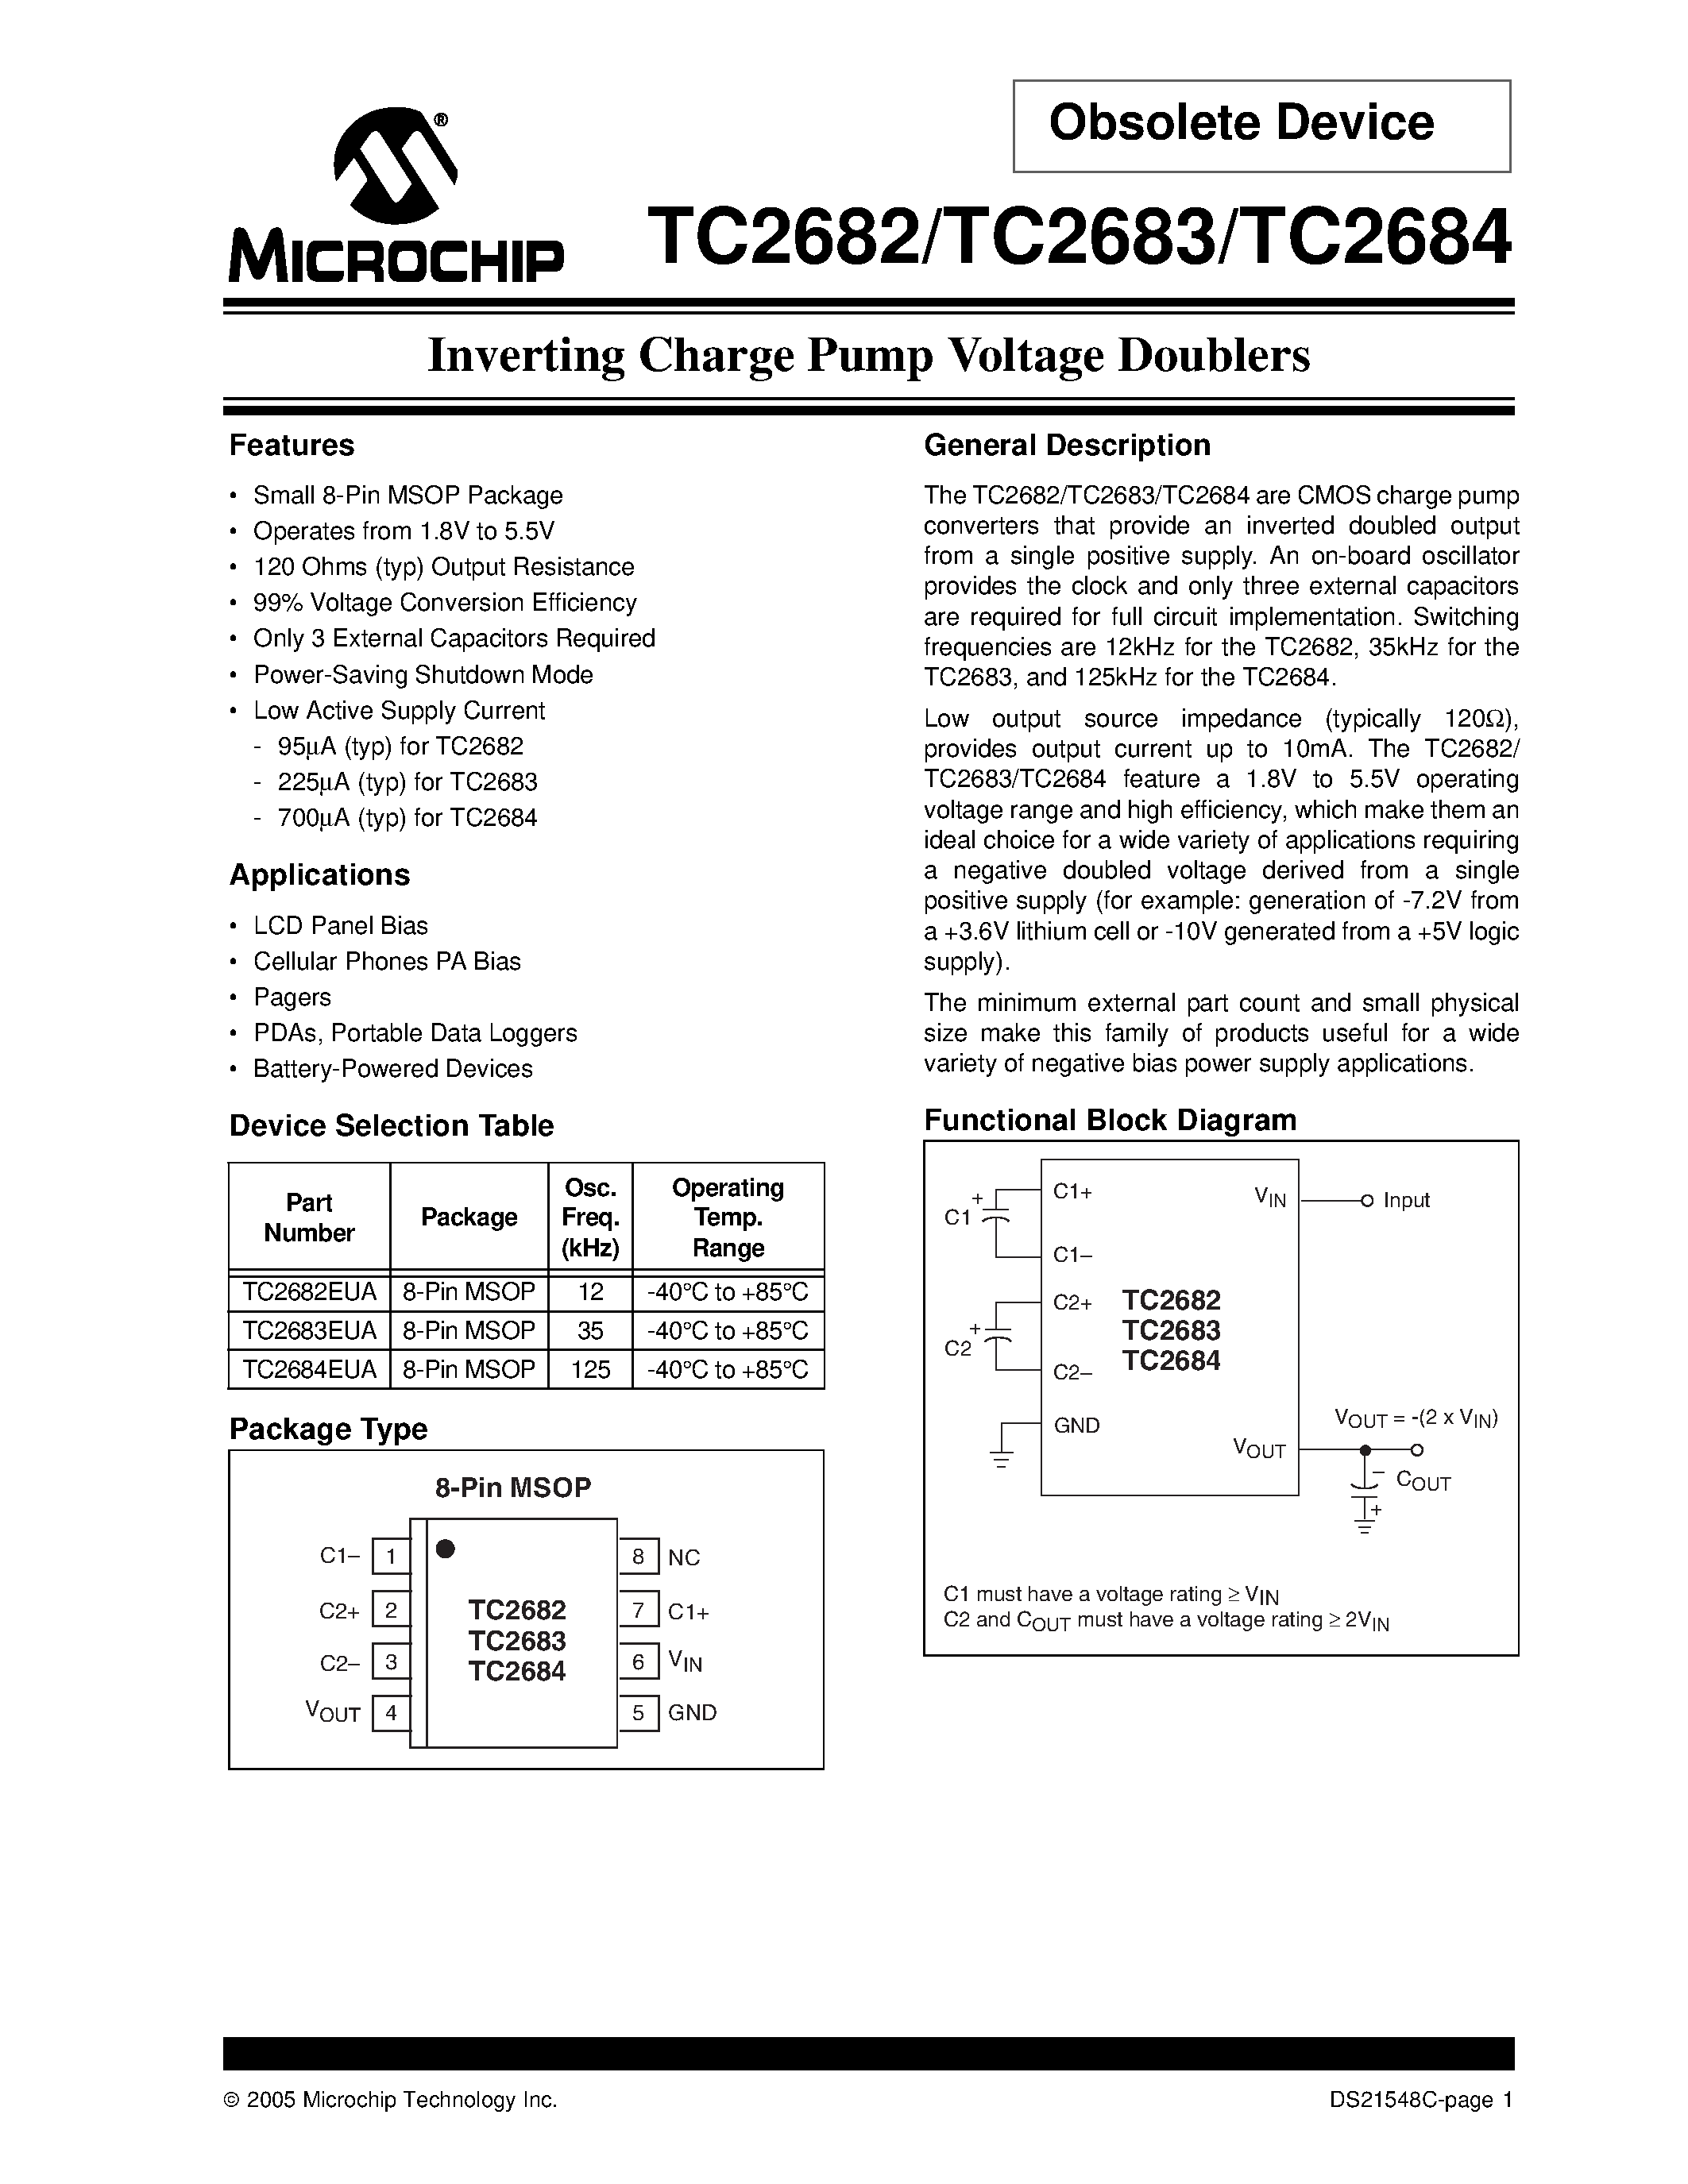 Datasheet TC2682 - (TC2682 - TC2684) Inverting Charge Pump Voltage Doublers page 1